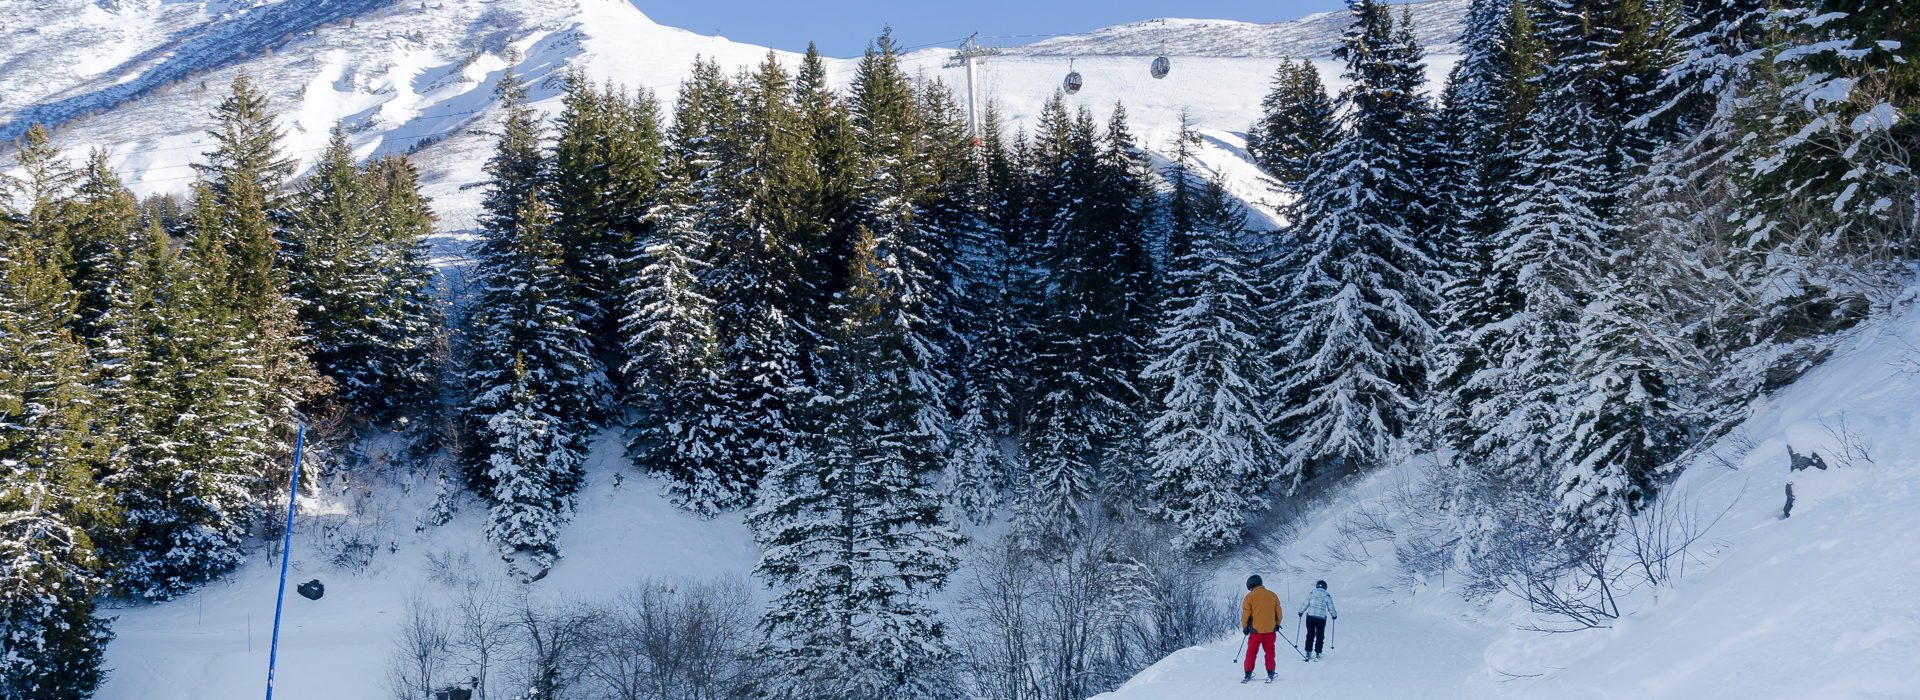 Two skiers on forest trail piste at Valmorel, Savoie, French Alps.